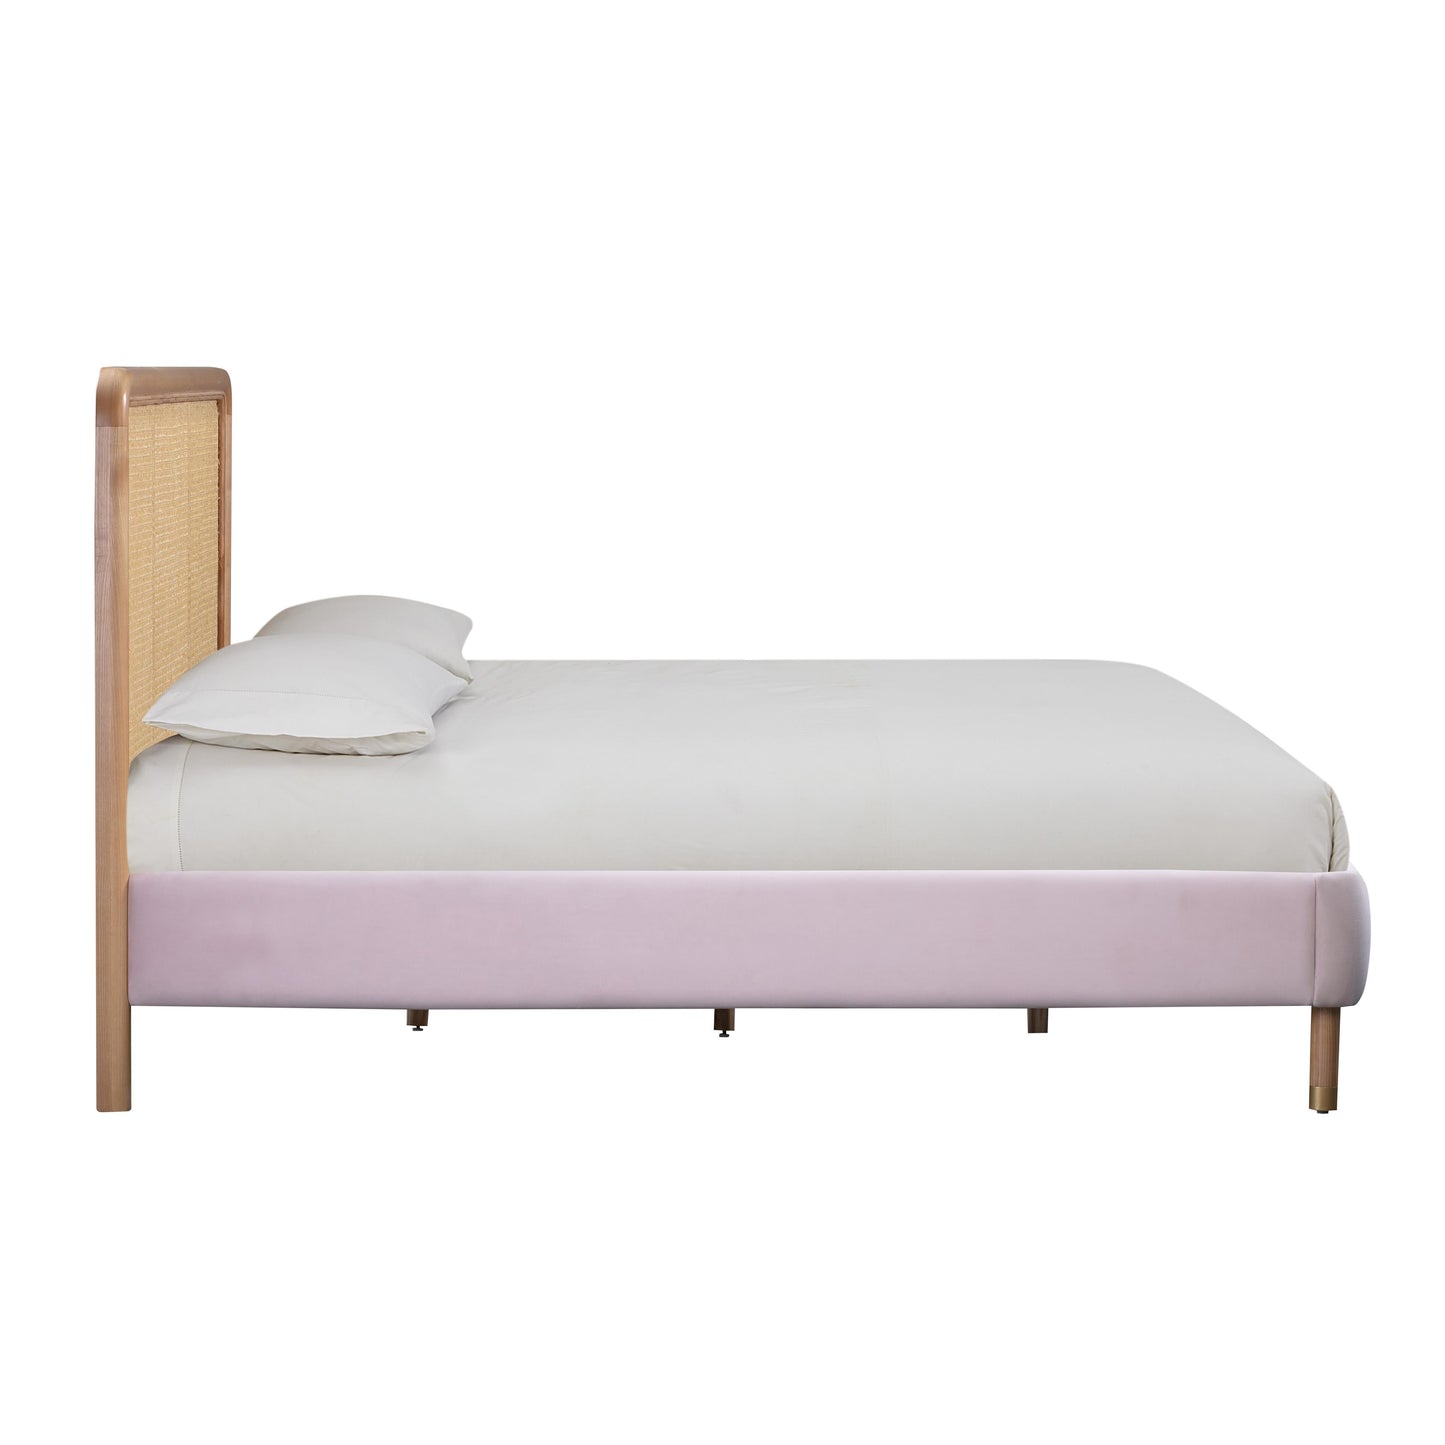 circe blush queen bed